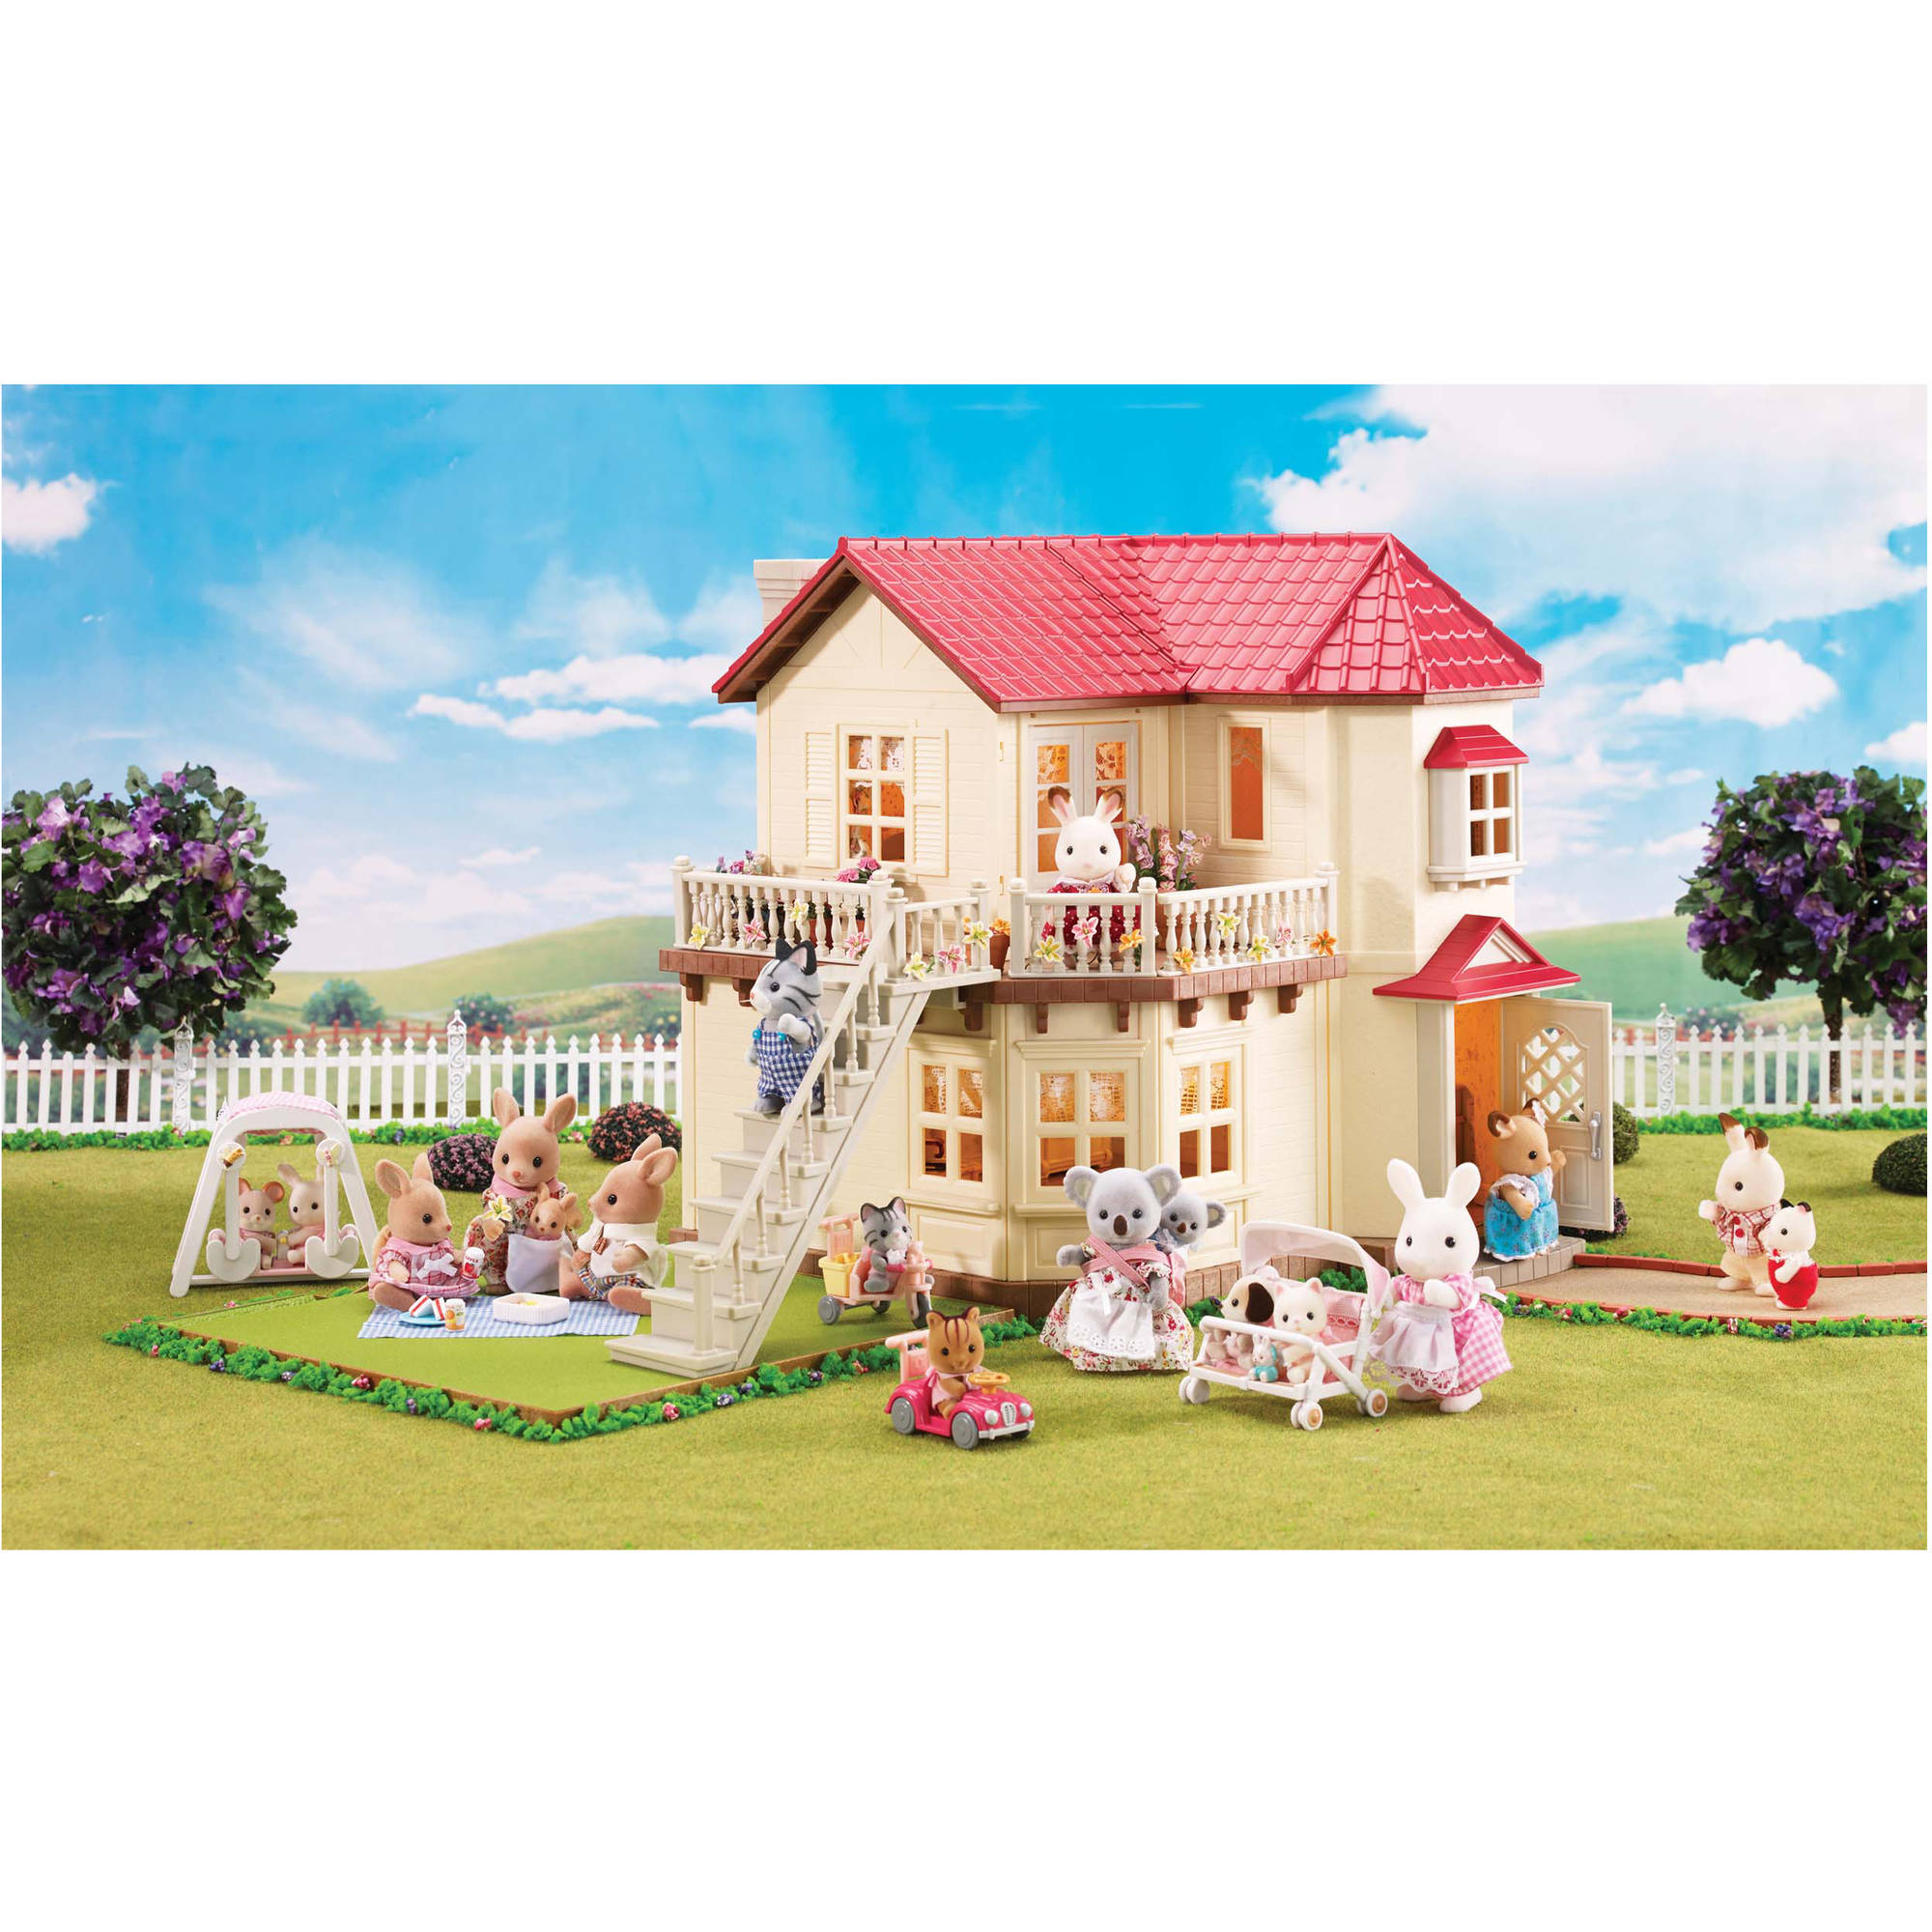 Calico Critters Luxury Townhome Gift Set - image 3 of 18